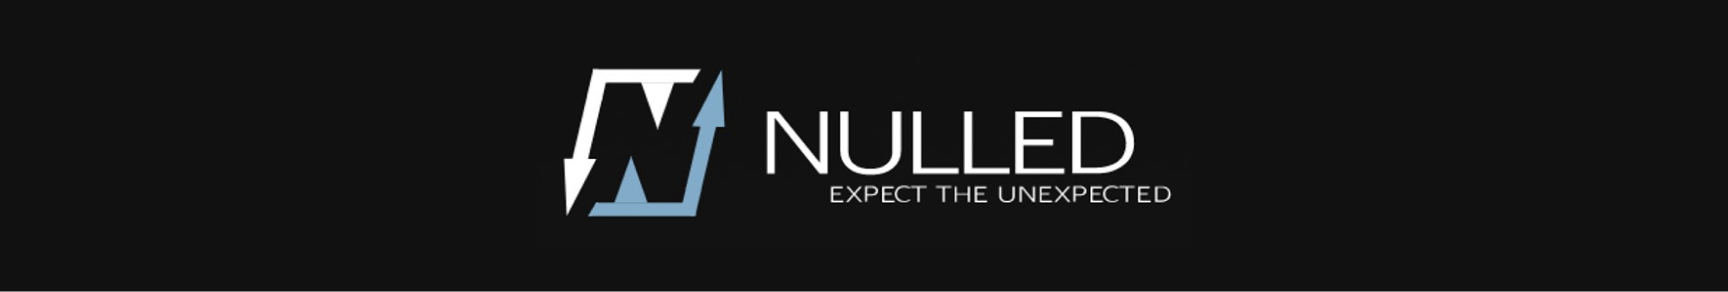 Nulled logo